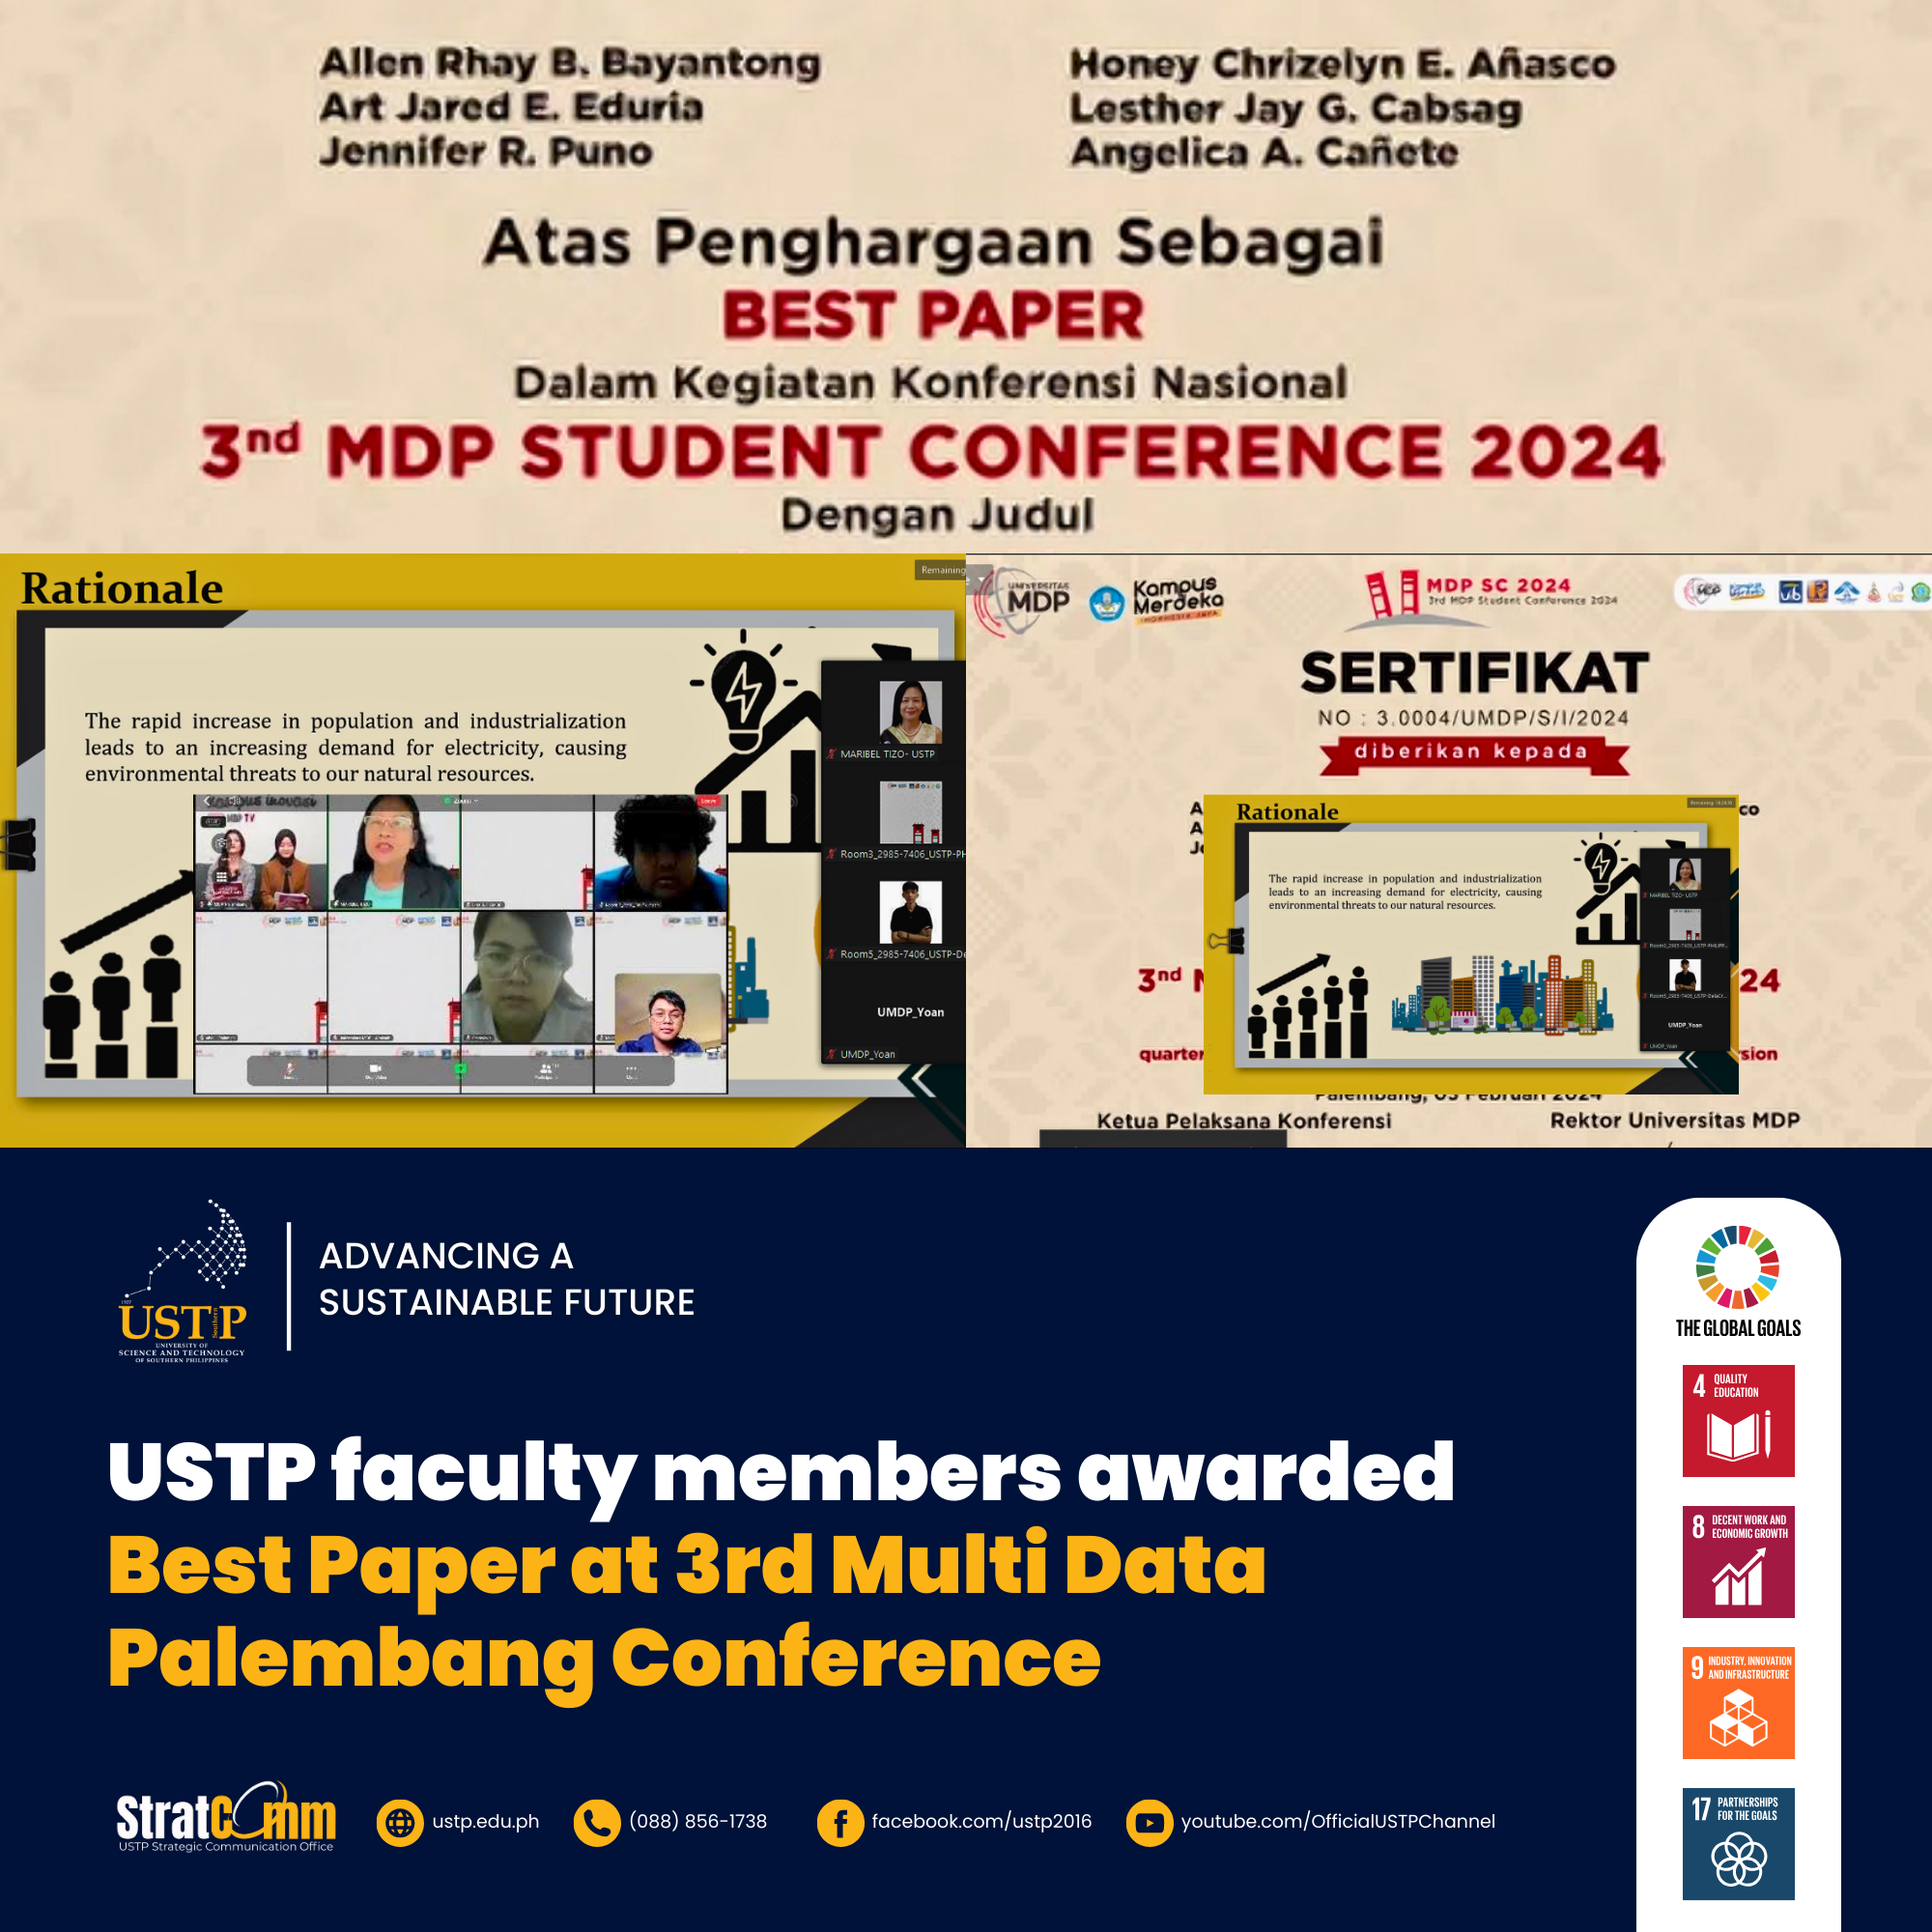 USTP faculty members awarded Best Paper at 3rd Multi Data Palembang Conference